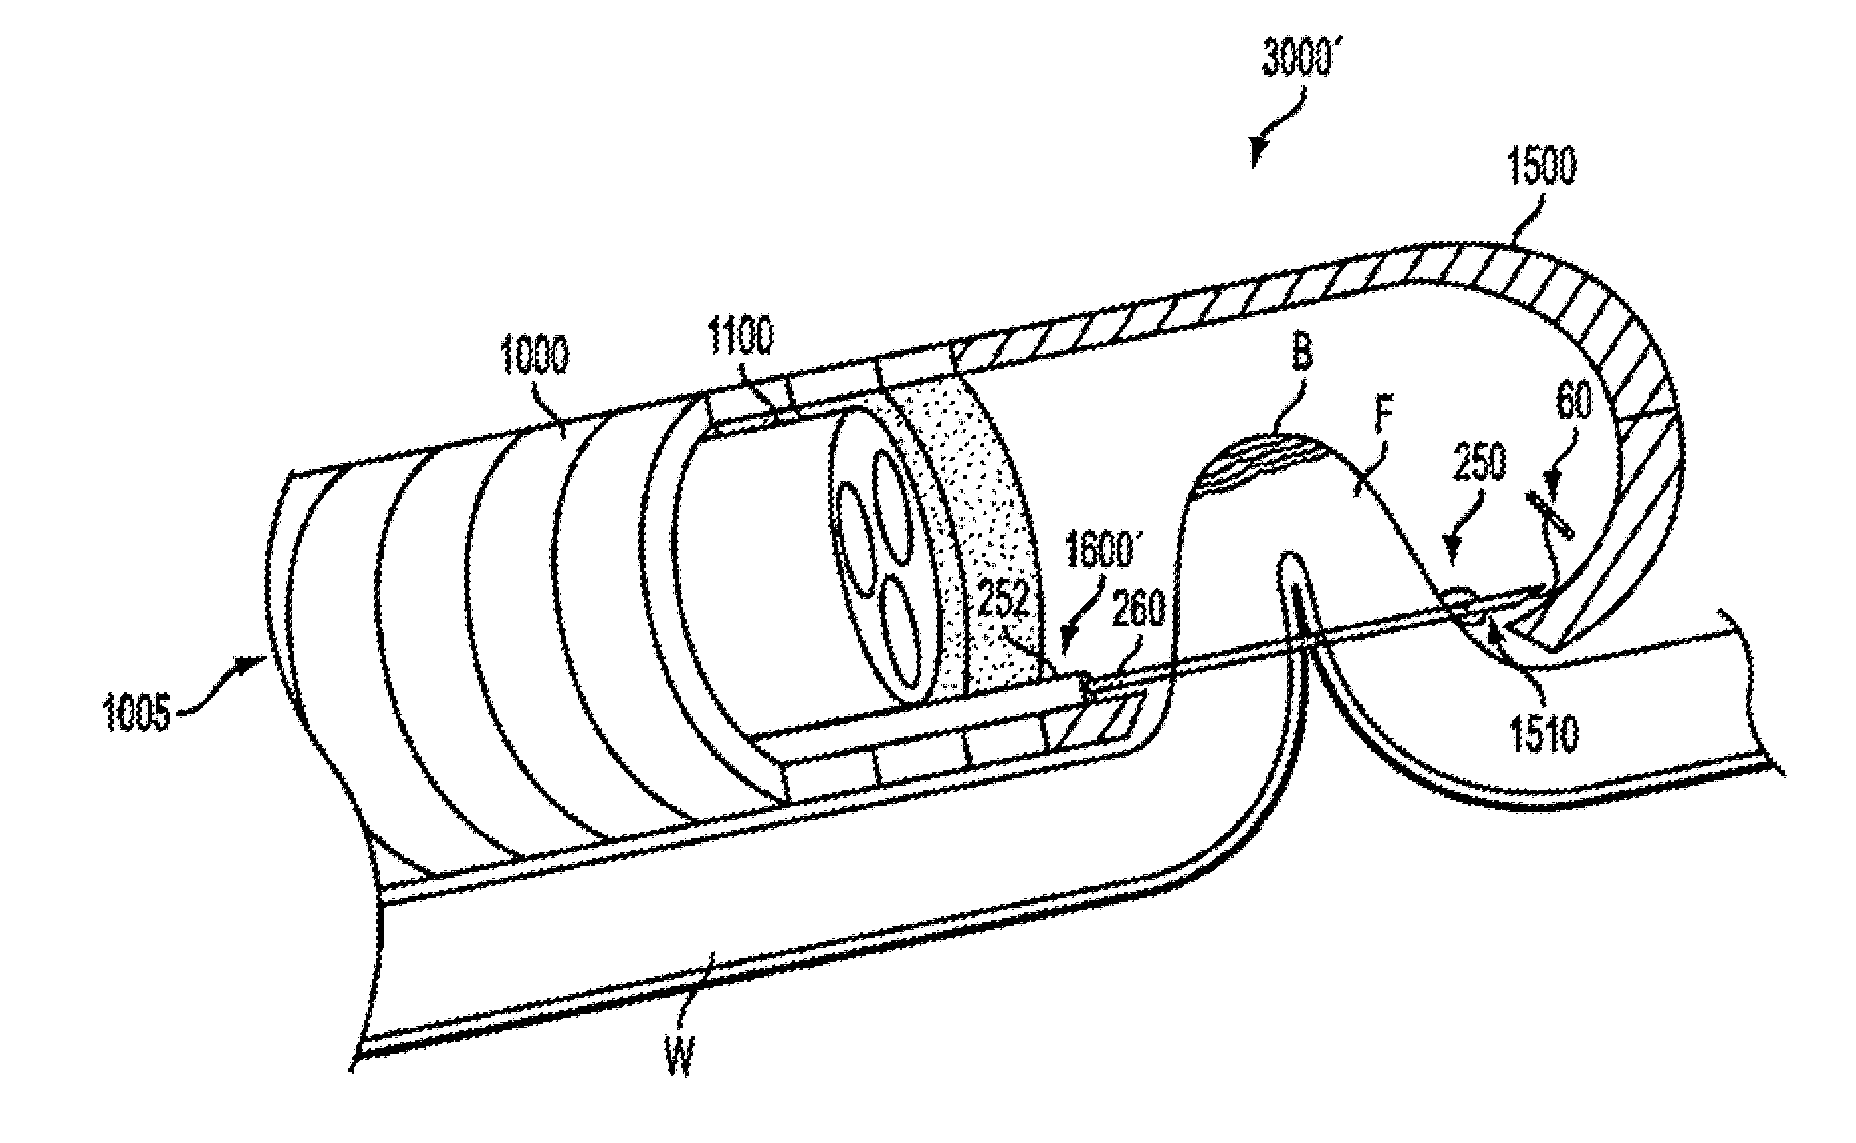 Apparatus and methods for forming and securing gastrointestinal tissue folds